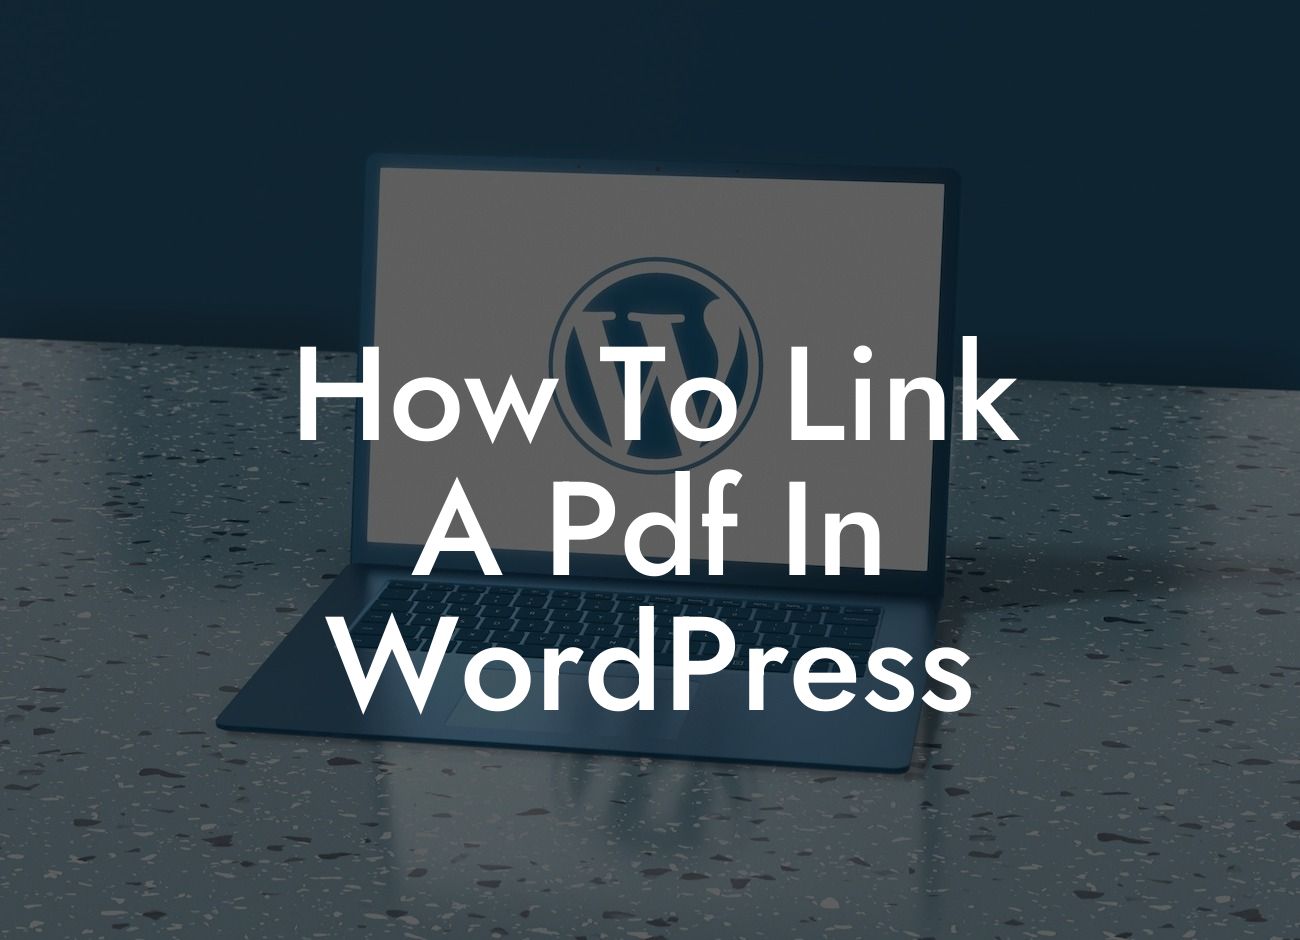 How To Link A Pdf In WordPress